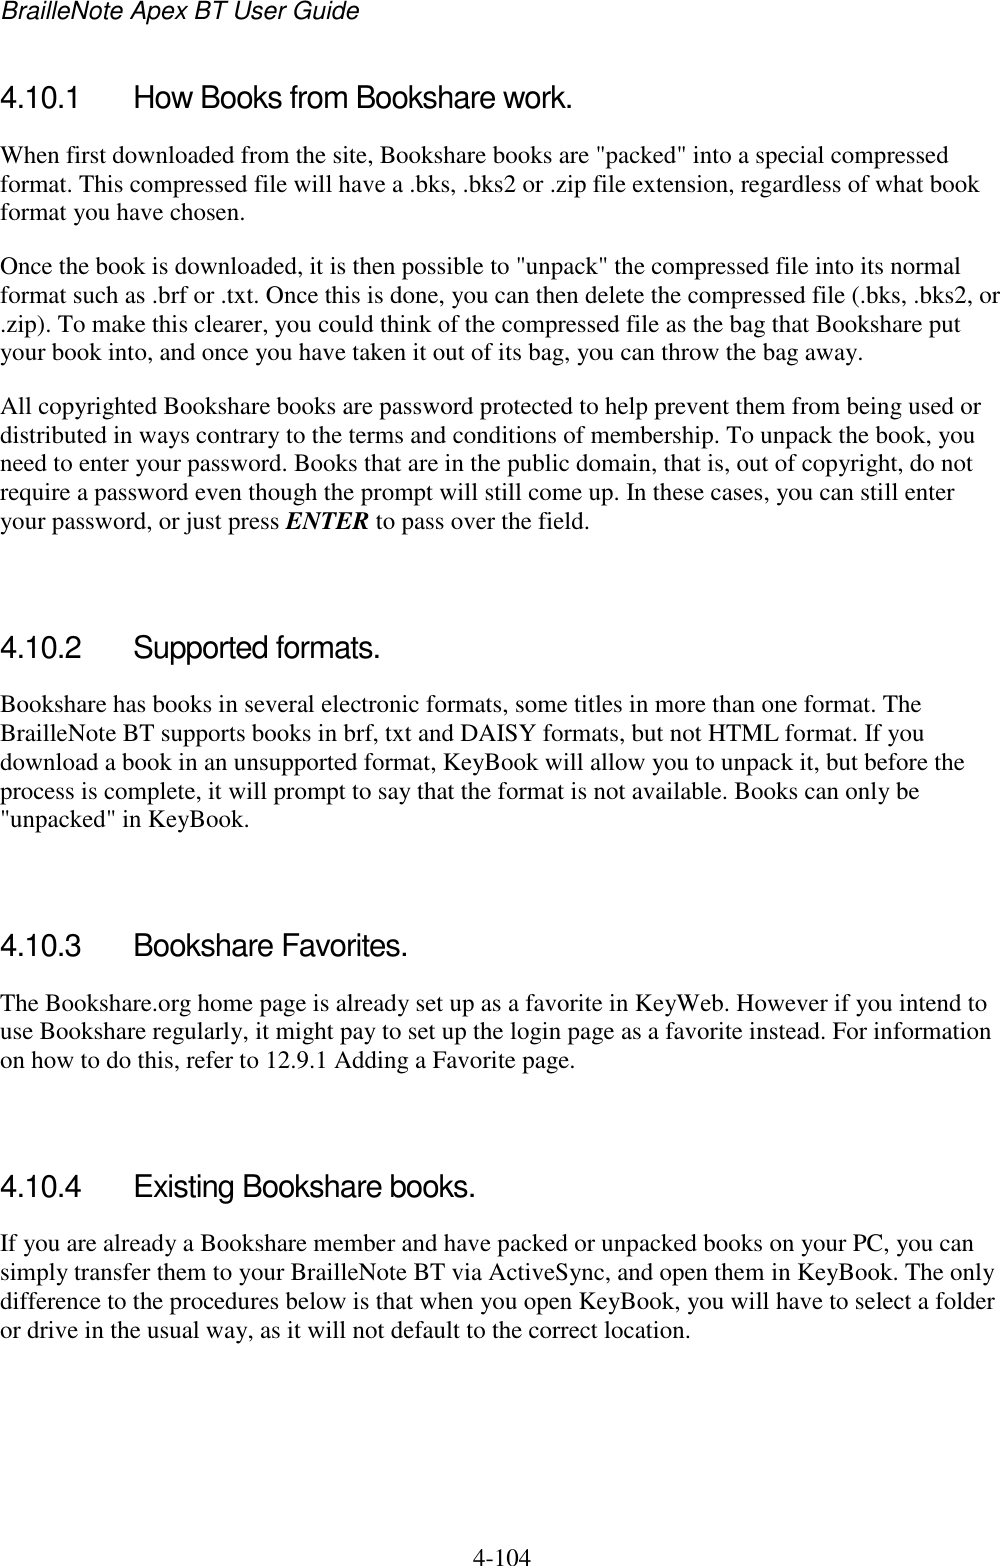 BrailleNote Apex BT User Guide   4-104   4.10.1  How Books from Bookshare work. When first downloaded from the site, Bookshare books are &quot;packed&quot; into a special compressed format. This compressed file will have a .bks, .bks2 or .zip file extension, regardless of what book format you have chosen. Once the book is downloaded, it is then possible to &quot;unpack&quot; the compressed file into its normal format such as .brf or .txt. Once this is done, you can then delete the compressed file (.bks, .bks2, or .zip). To make this clearer, you could think of the compressed file as the bag that Bookshare put your book into, and once you have taken it out of its bag, you can throw the bag away. All copyrighted Bookshare books are password protected to help prevent them from being used or distributed in ways contrary to the terms and conditions of membership. To unpack the book, you need to enter your password. Books that are in the public domain, that is, out of copyright, do not require a password even though the prompt will still come up. In these cases, you can still enter your password, or just press ENTER to pass over the field.   4.10.2  Supported formats. Bookshare has books in several electronic formats, some titles in more than one format. The BrailleNote BT supports books in brf, txt and DAISY formats, but not HTML format. If you download a book in an unsupported format, KeyBook will allow you to unpack it, but before the process is complete, it will prompt to say that the format is not available. Books can only be &quot;unpacked&quot; in KeyBook.   4.10.3  Bookshare Favorites. The Bookshare.org home page is already set up as a favorite in KeyWeb. However if you intend to use Bookshare regularly, it might pay to set up the login page as a favorite instead. For information on how to do this, refer to 12.9.1 Adding a Favorite page.   4.10.4  Existing Bookshare books. If you are already a Bookshare member and have packed or unpacked books on your PC, you can simply transfer them to your BrailleNote BT via ActiveSync, and open them in KeyBook. The only difference to the procedures below is that when you open KeyBook, you will have to select a folder or drive in the usual way, as it will not default to the correct location.   